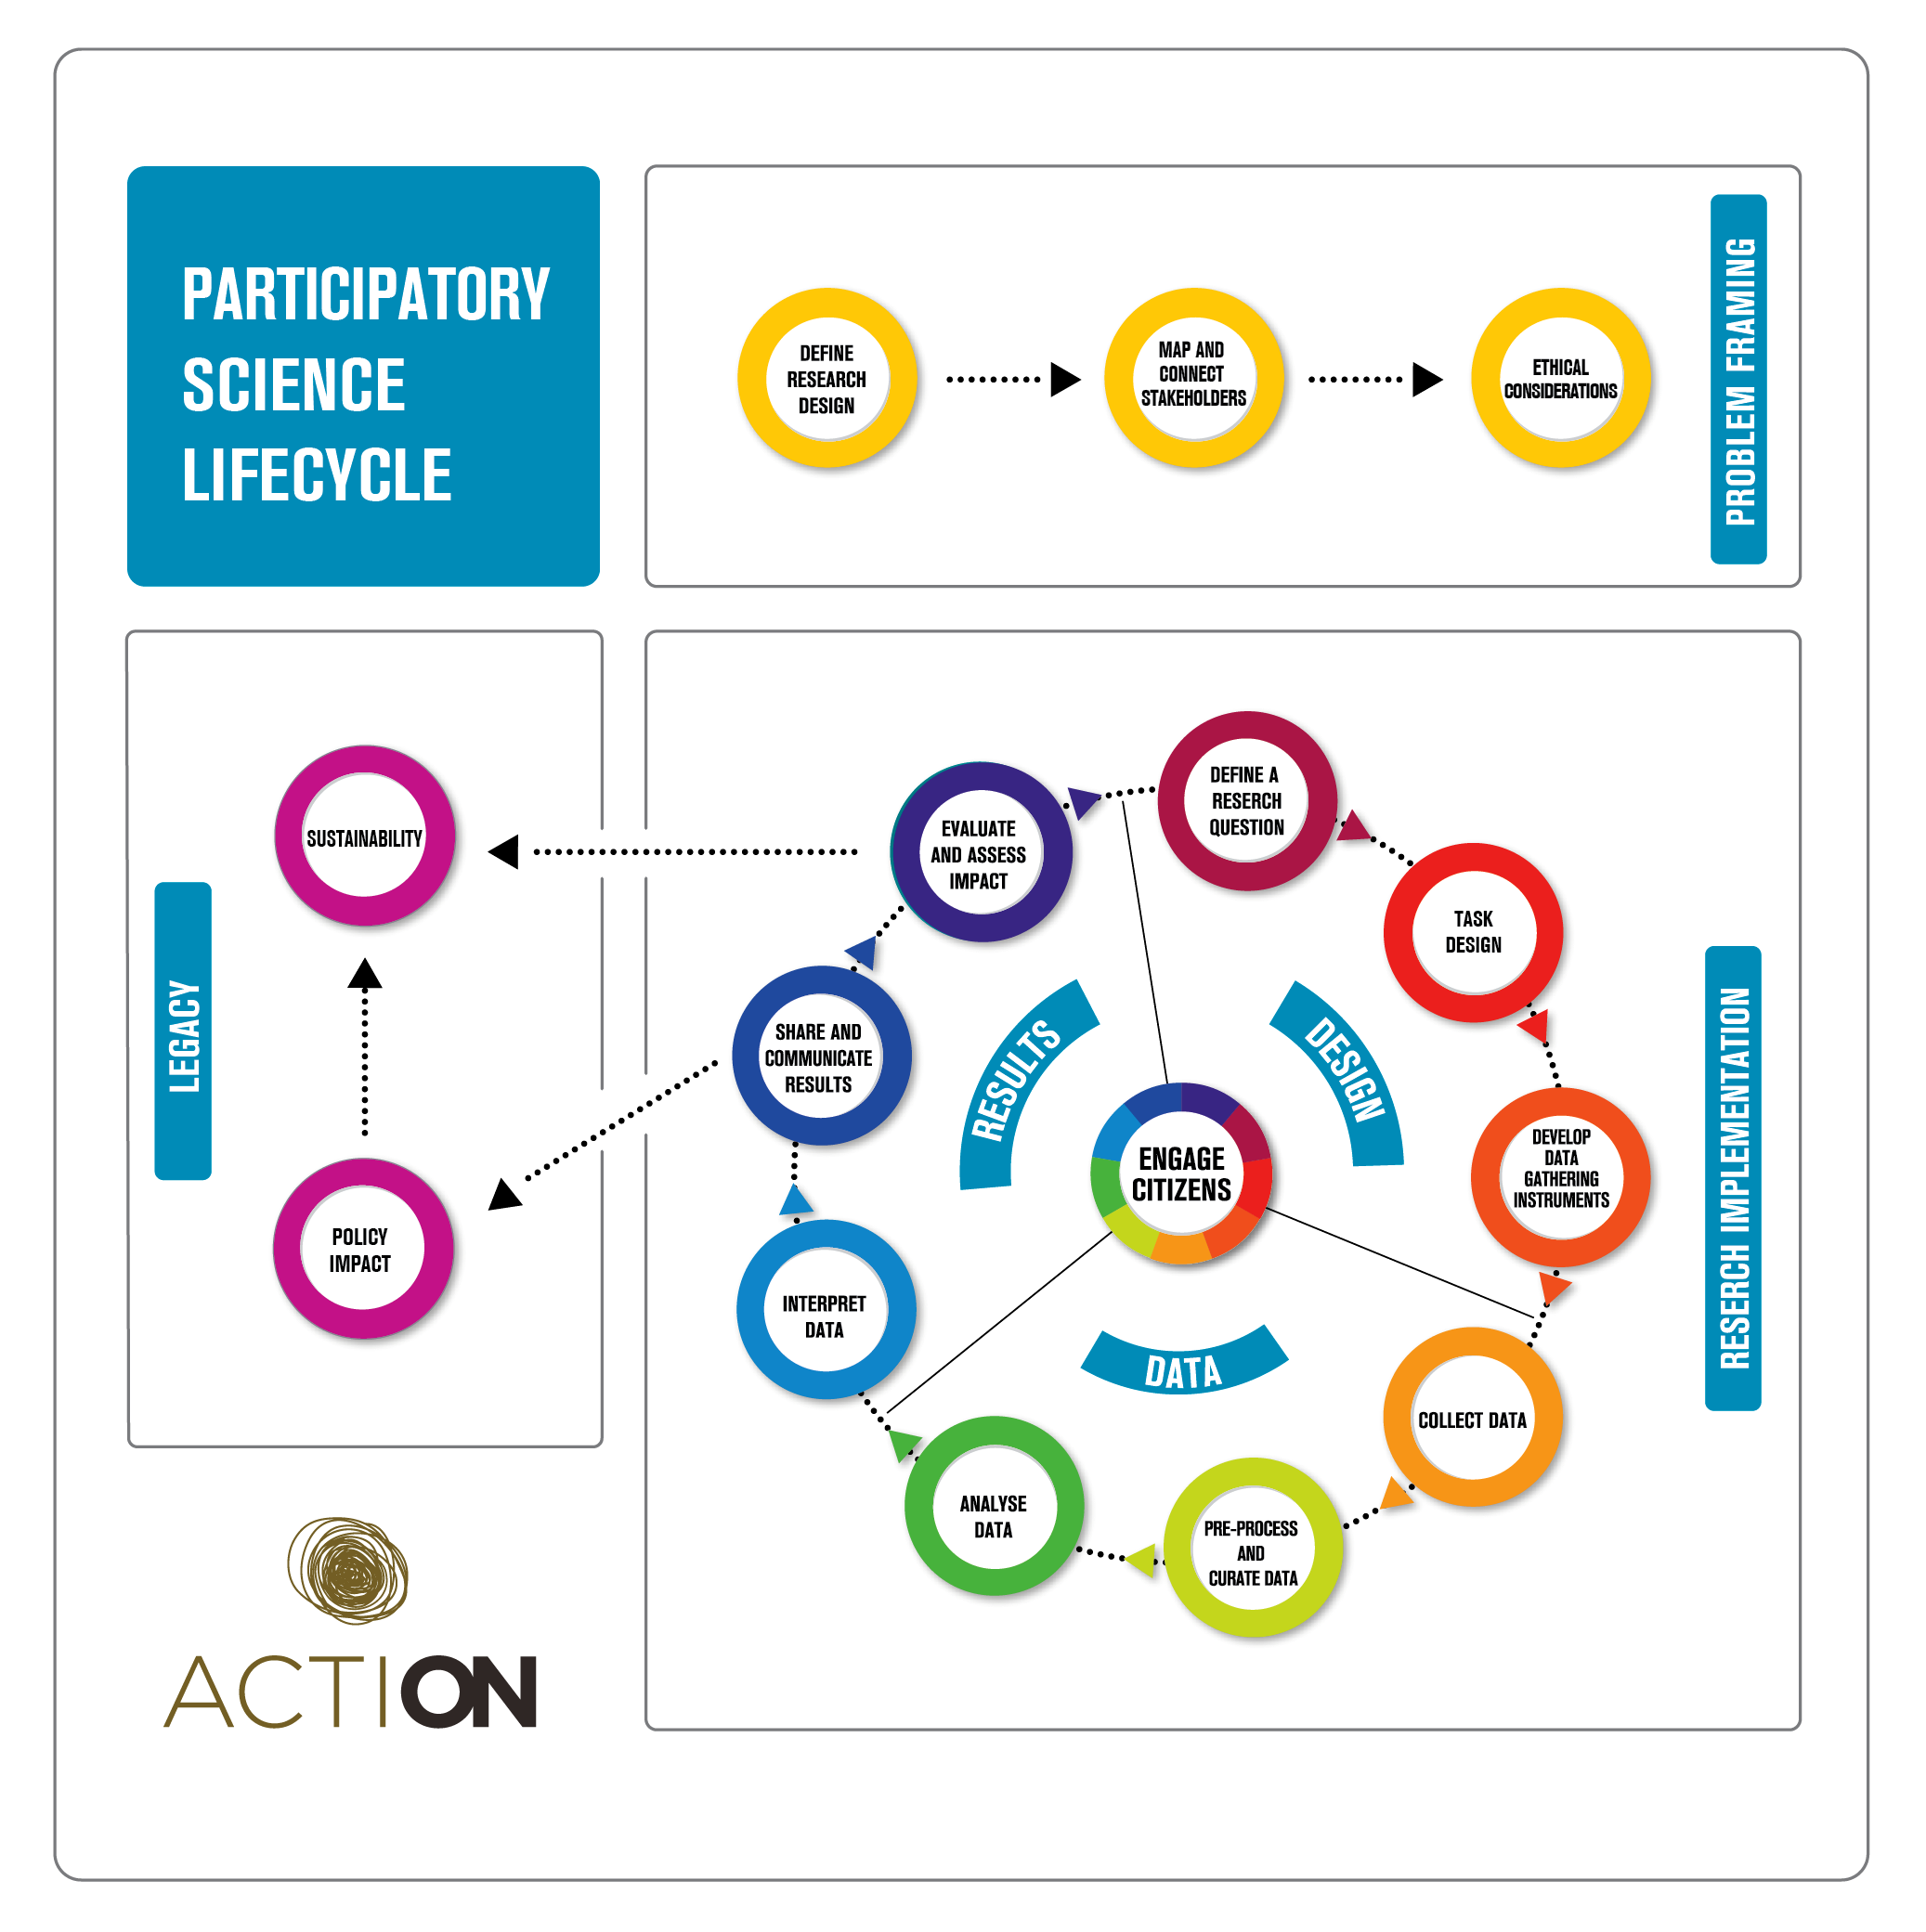 Picture of the Participatory Science Lifecycle